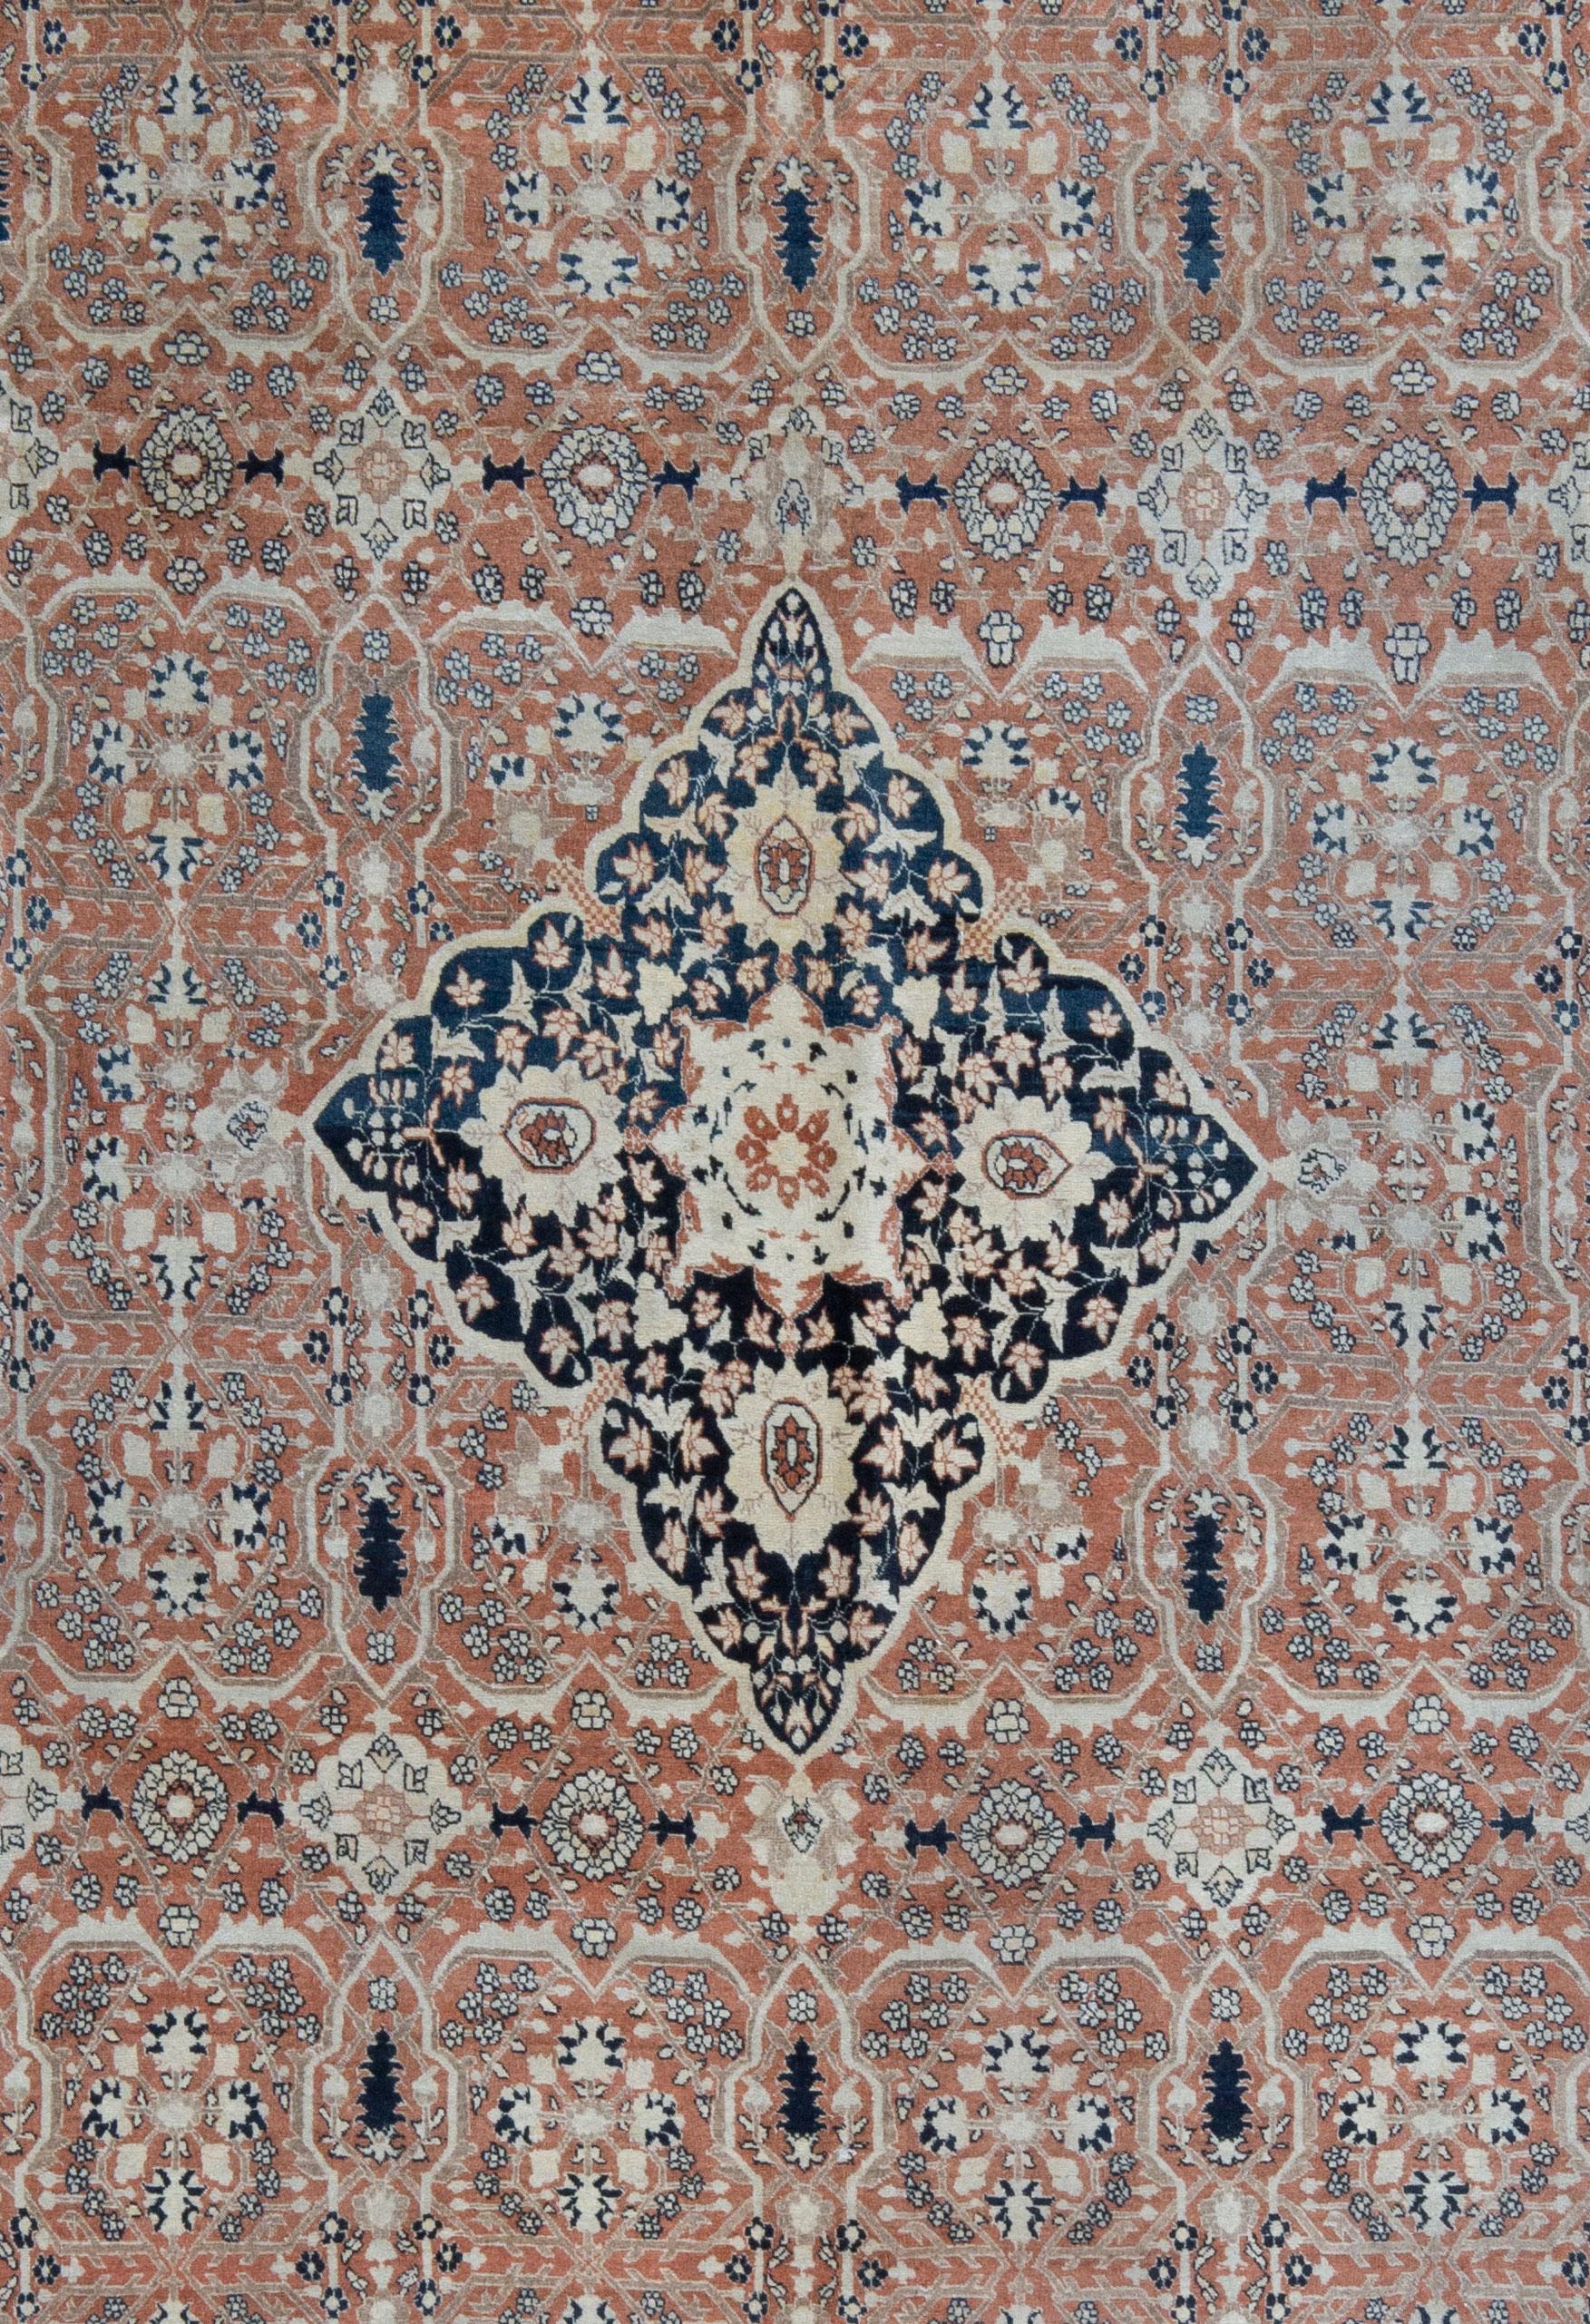 Hand-Woven Antique Persian Hadji Jalili Tabriz Blush Pink and Blue Rug, Late 19th Century For Sale